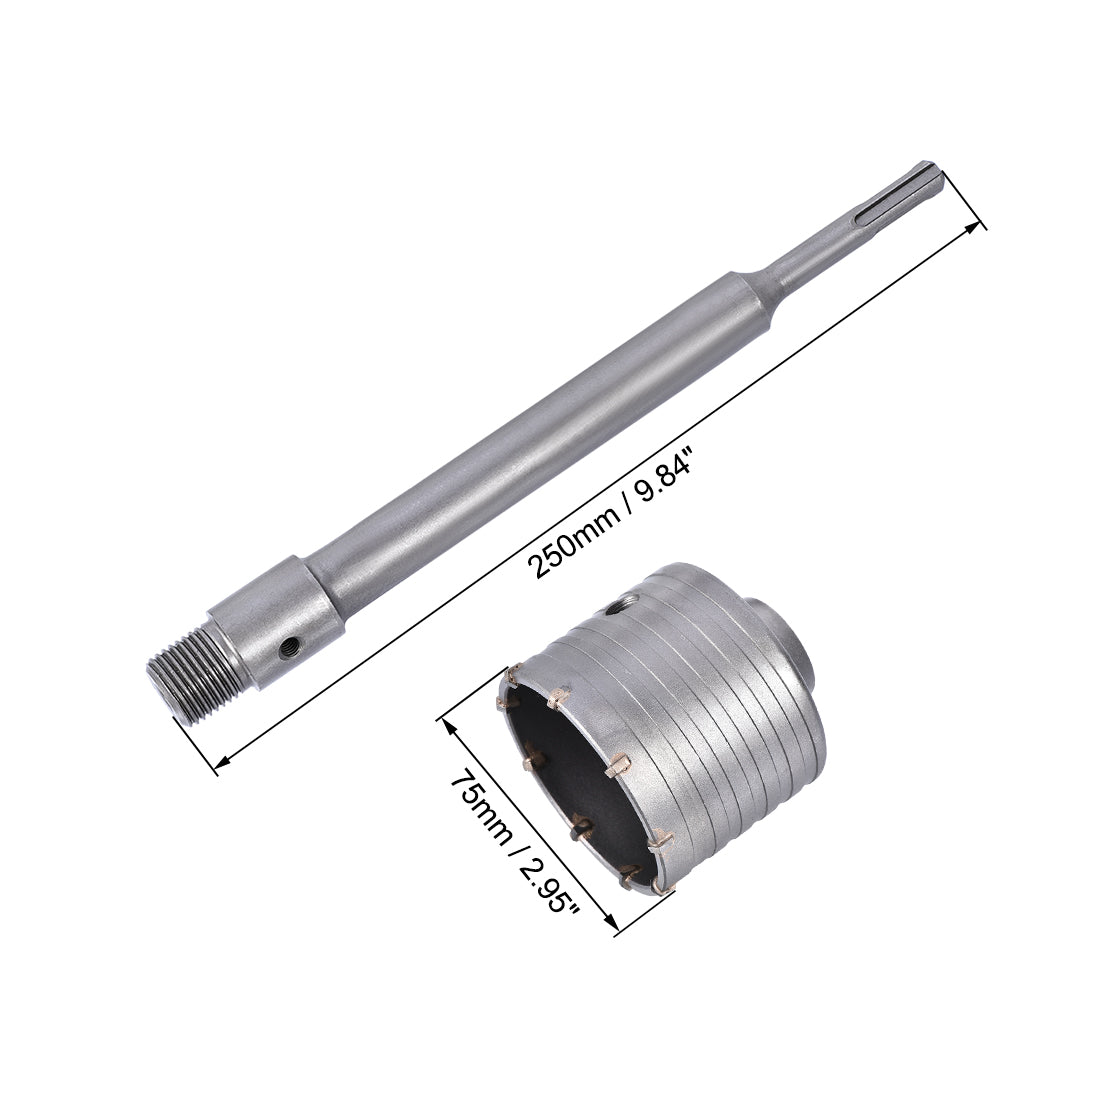 uxcell Uxcell Wall Hole Drill Bit Stone Hole Saw Round Shank with Connecting Rod Drill for SDS X4 Impact Drill